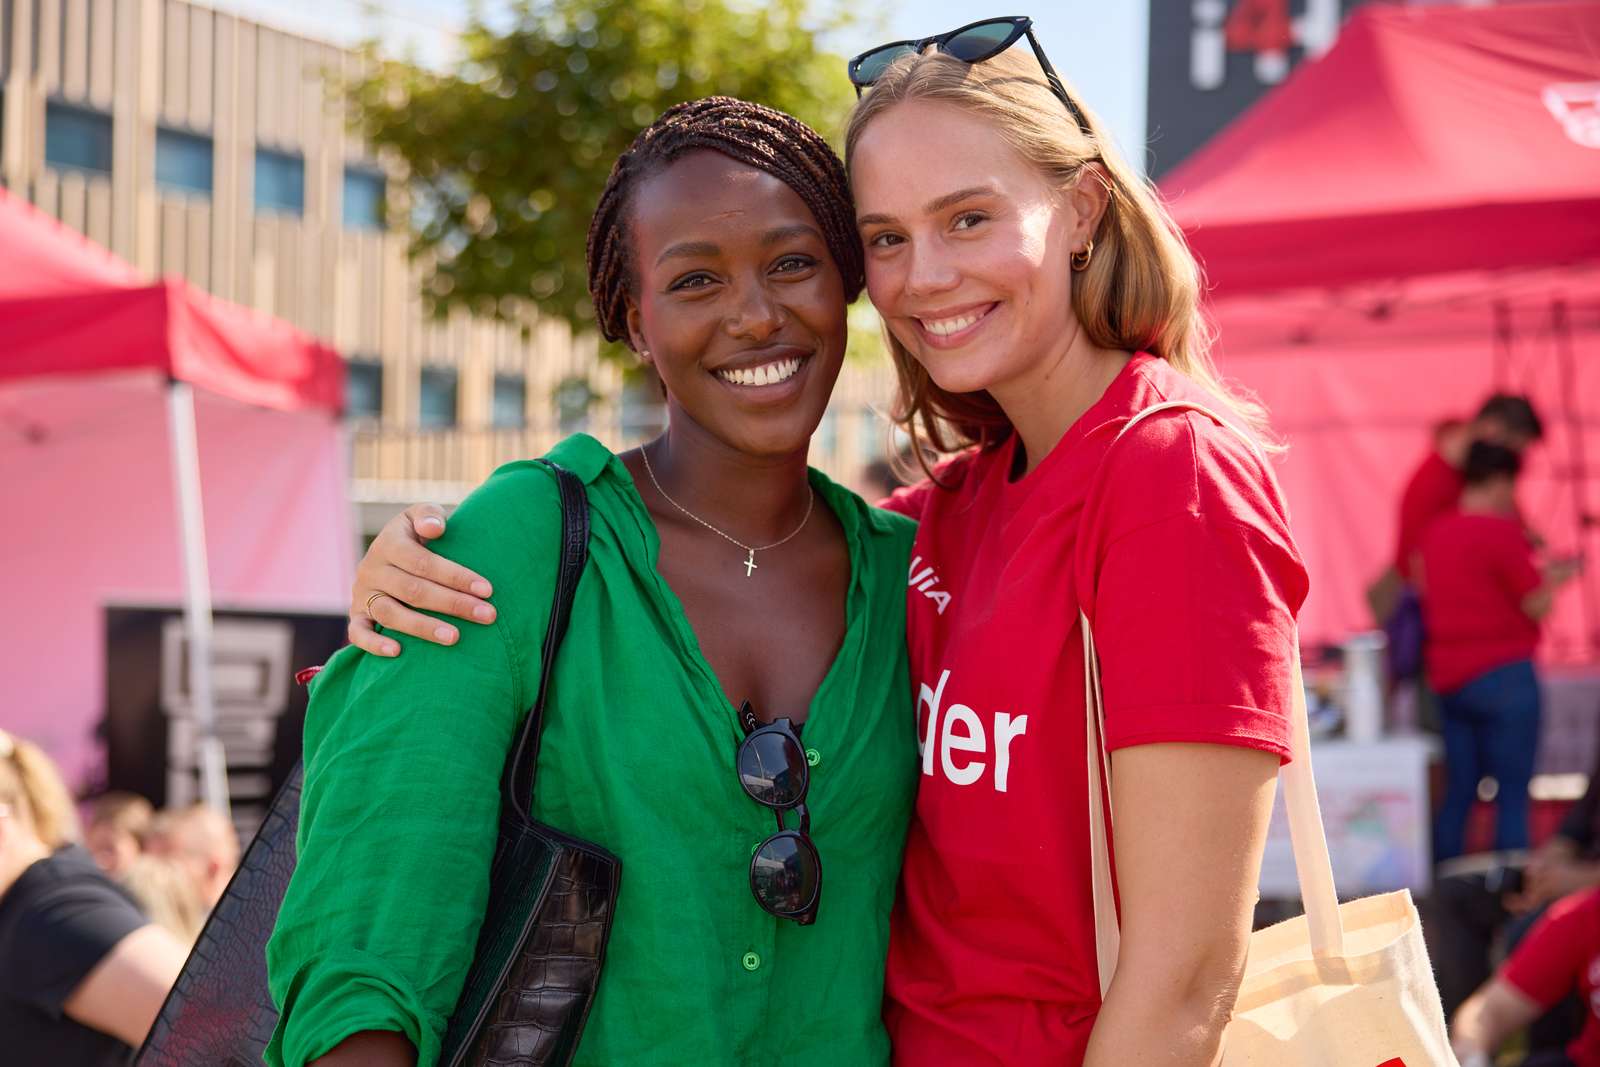 Two women are holding around each other and smiling to the camera. The girl on the left is dark skinned, wearing a green blouse. The girl on the right is light skinned and is wearing a red "buddy" t-shirt.